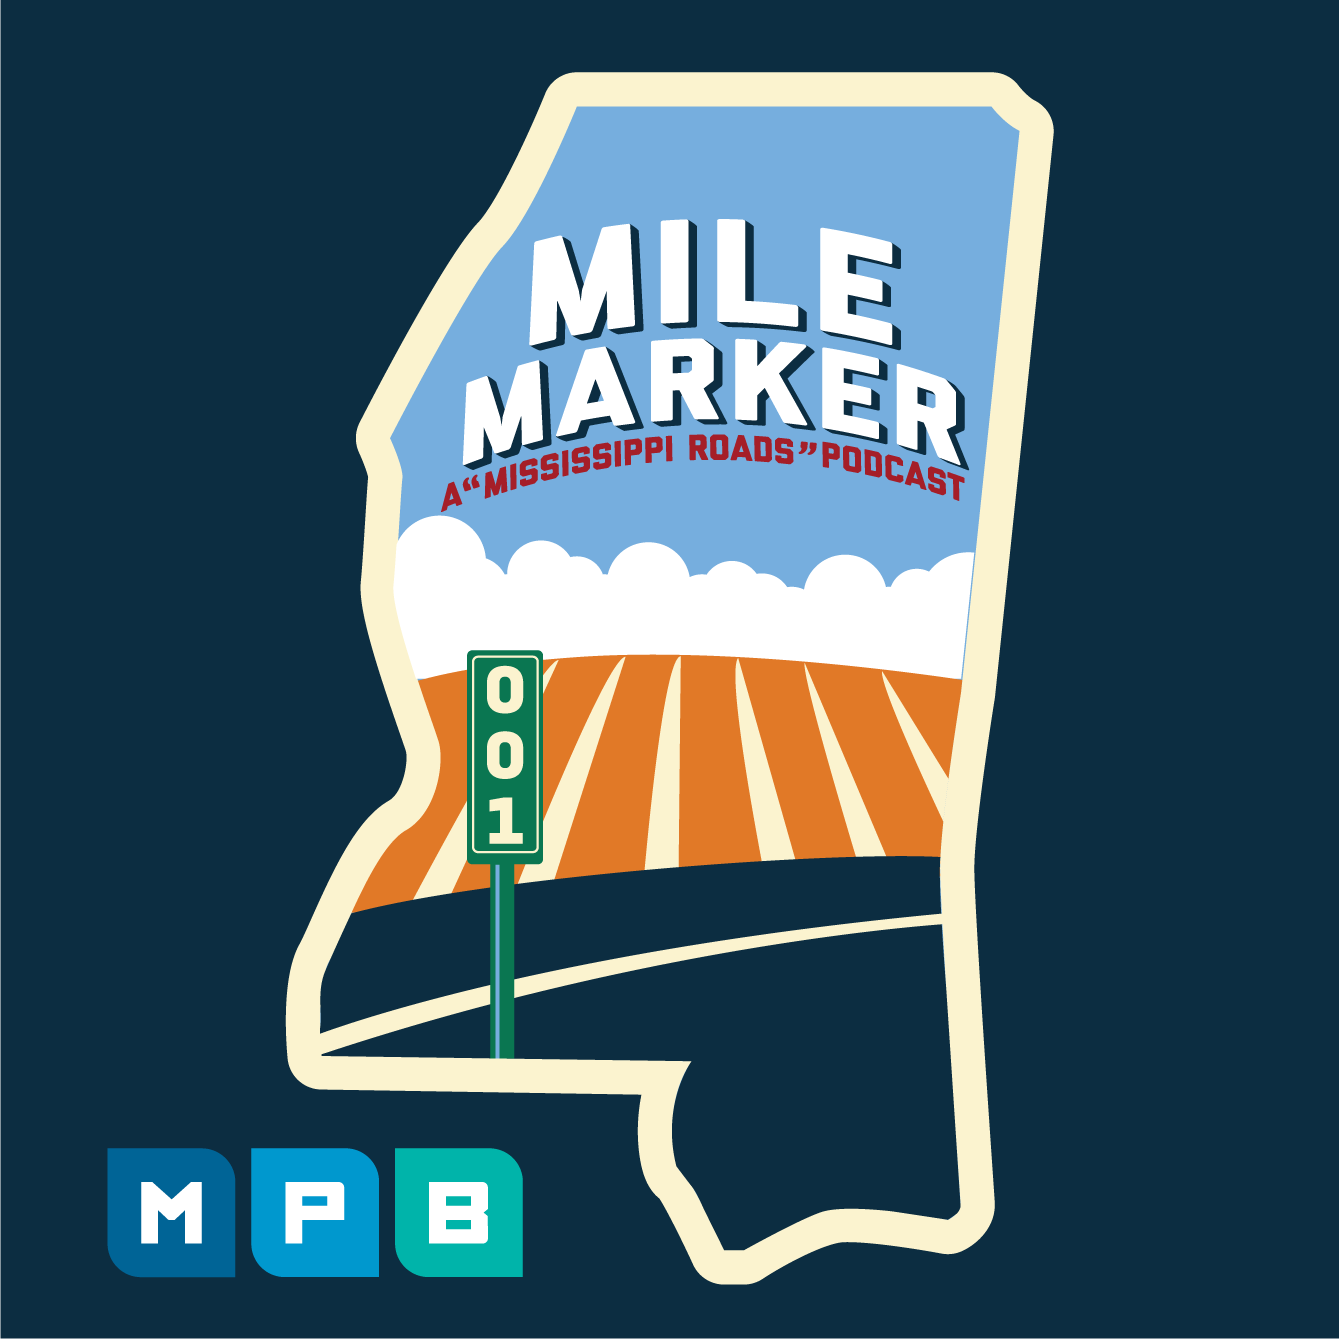 Mile Marker podcast takes listeners across Mississippi and back